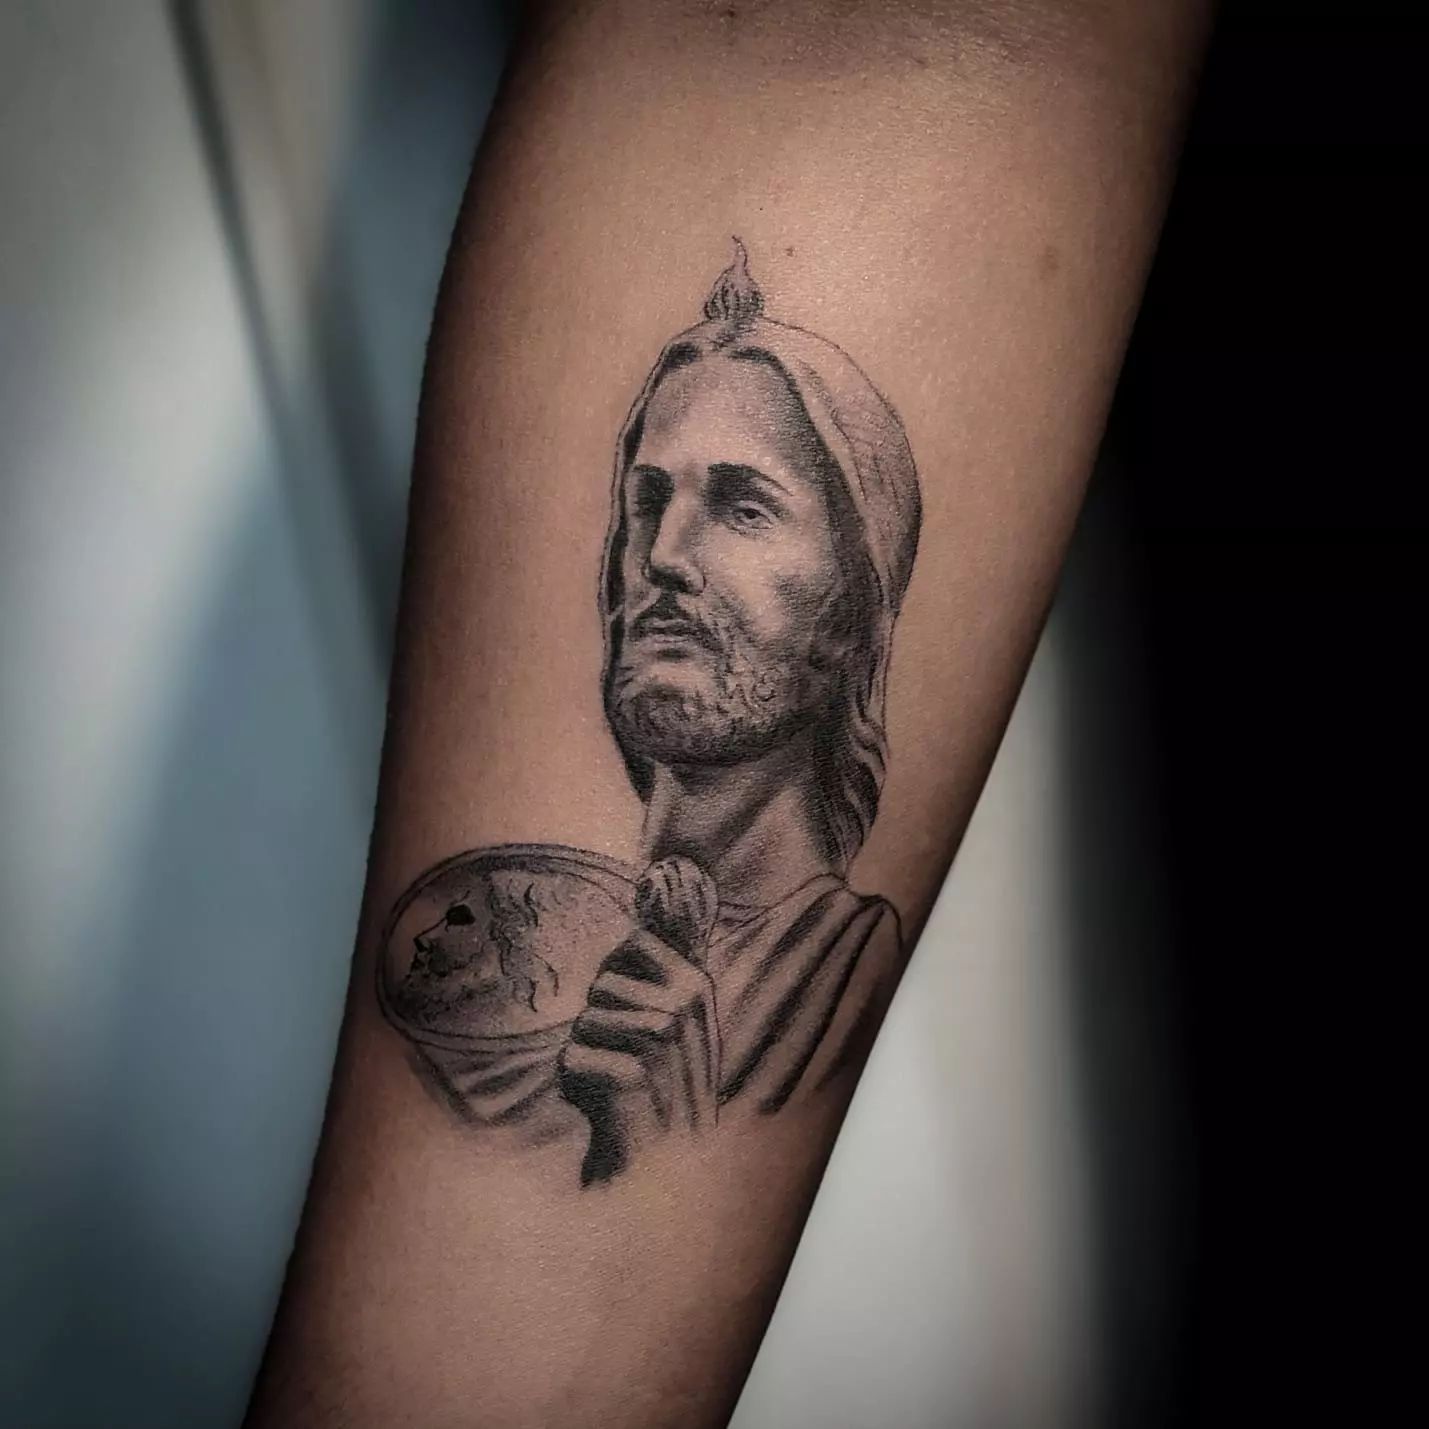 The Art and Significance of San Judas Tadeo Tattoos